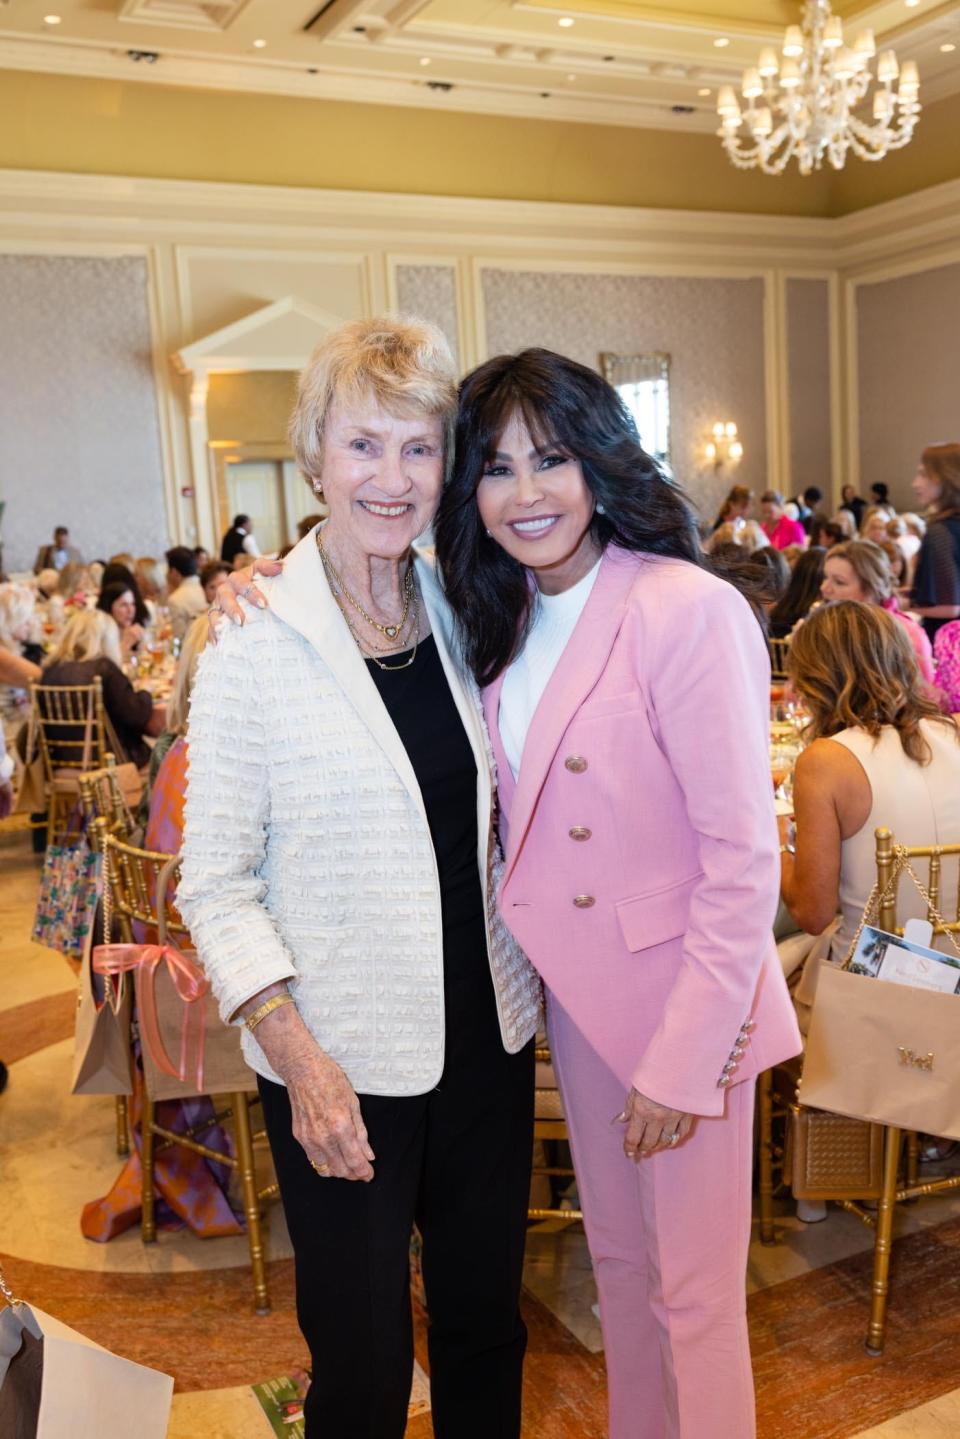 Barbara Nicklaus and Marie Osmond at the Old Bags Luncheon benefiting the Center for Family Services of Palm Beach County at The Breakers on Feb. 22.